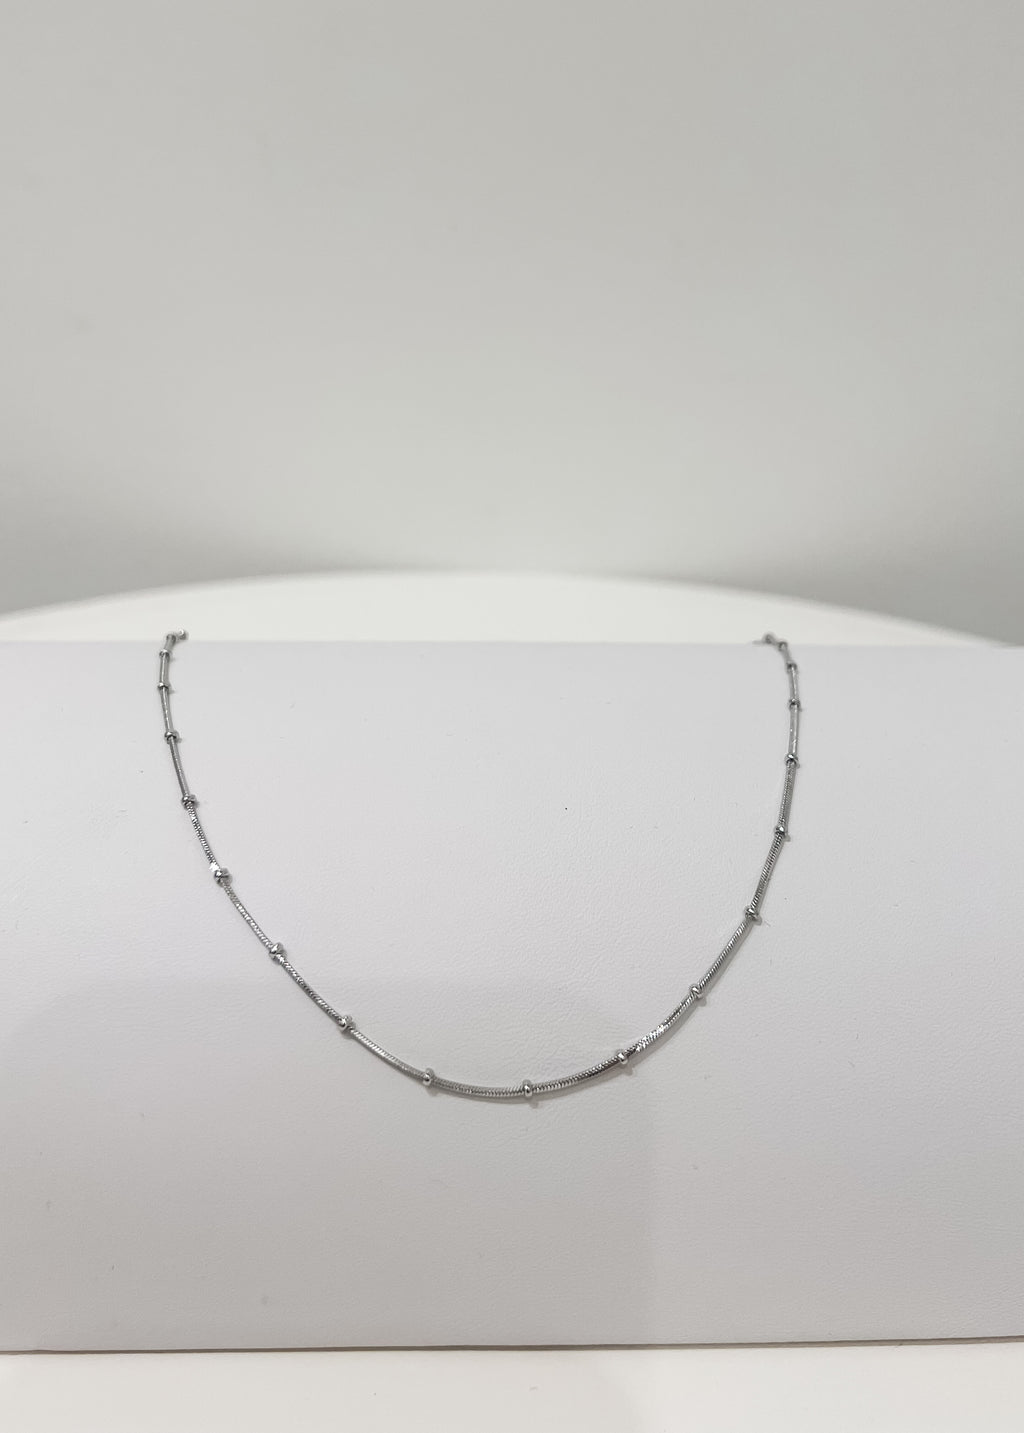 Thin ball necklace, silver